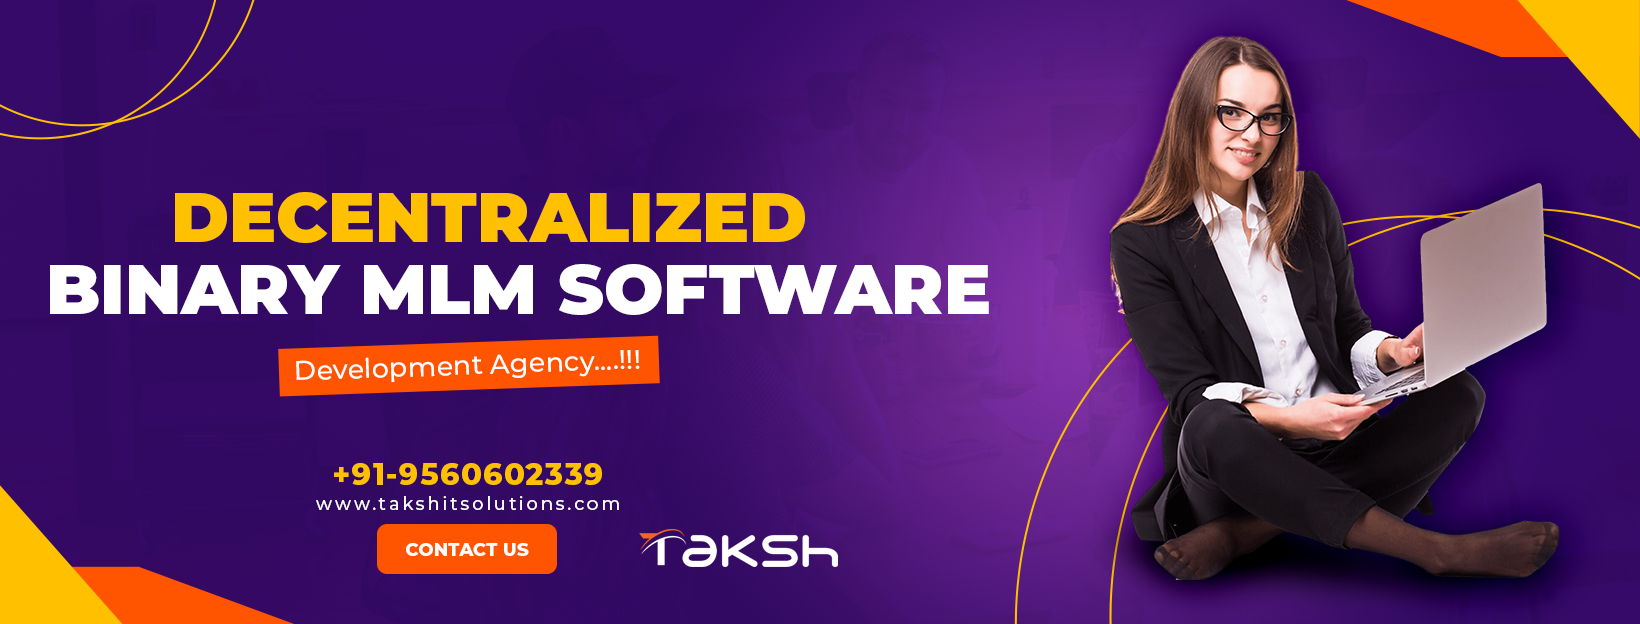 Decentralized Binary MLM Plan Software Development Company || Taksh IT Solutions Private Limited